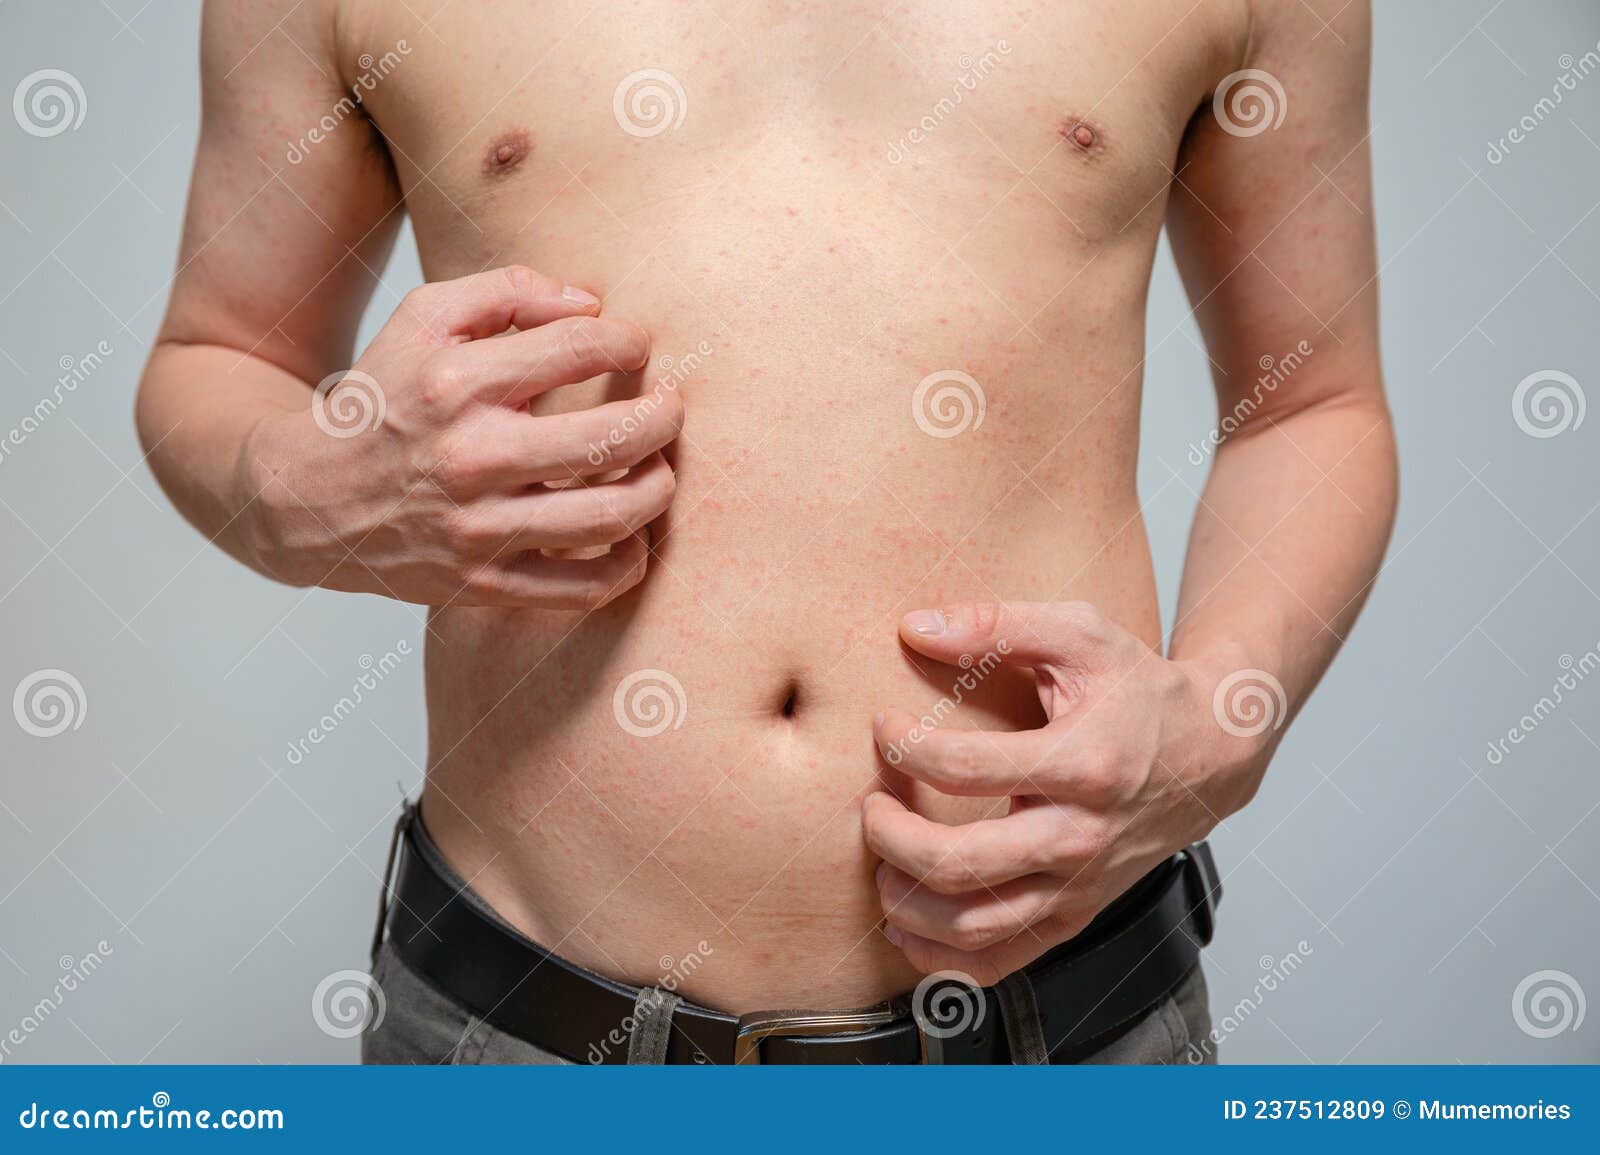 Dermatitis Rash Viral Disease with Immunodeficiency on Body of Young Adult  Asian, Scratching with Itching Stock Image - Image of allergic, contagious:  237512809